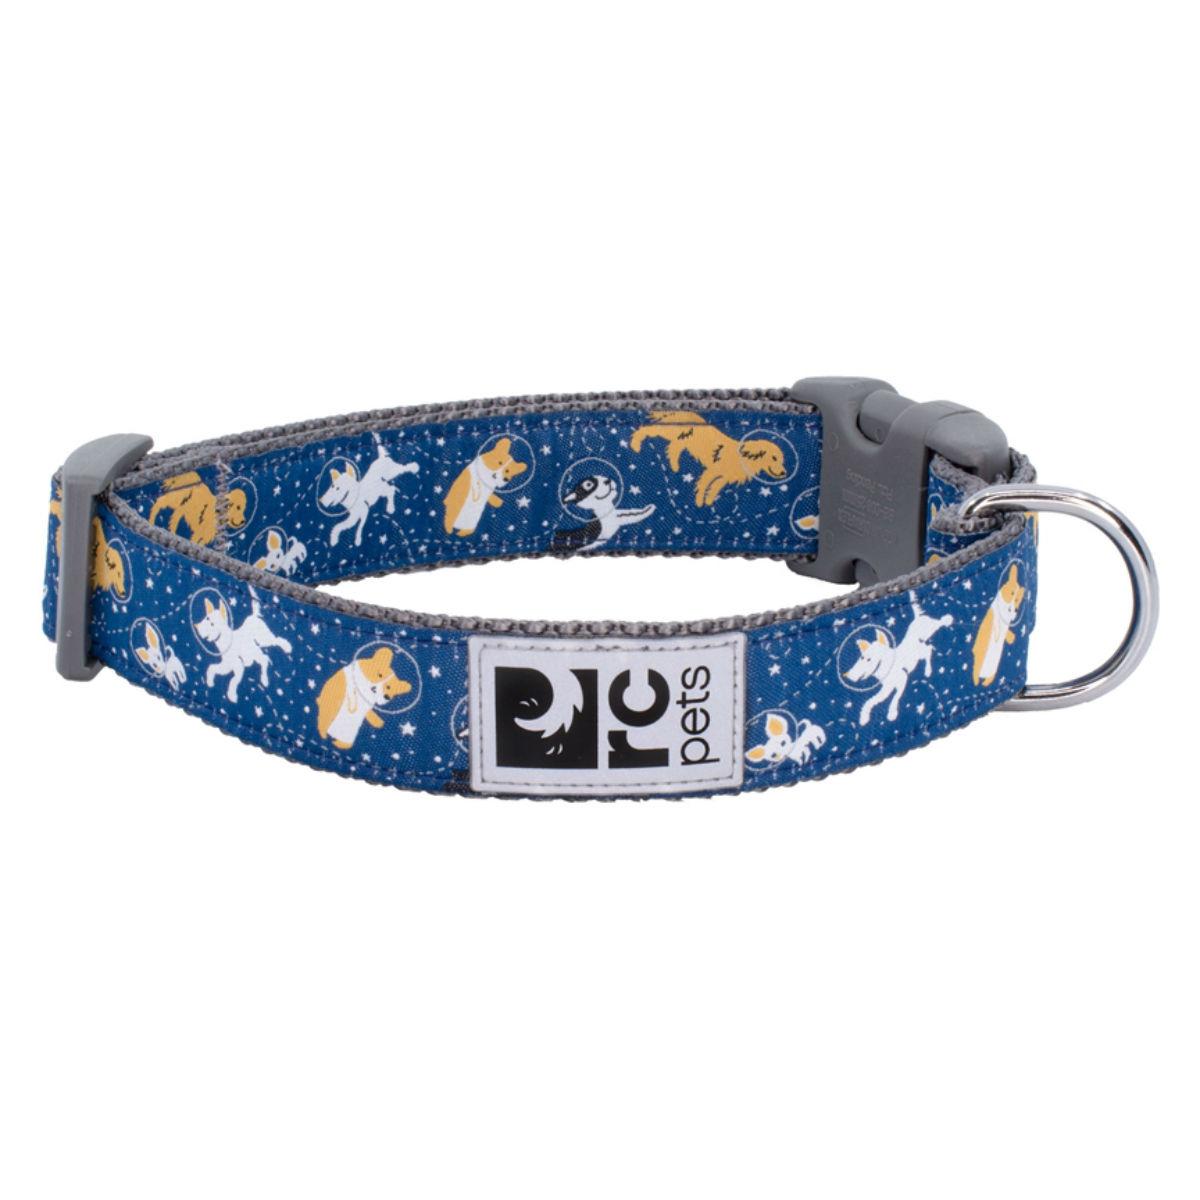 Space Dogs Adjustable Clip Dog Collar By RC Pets